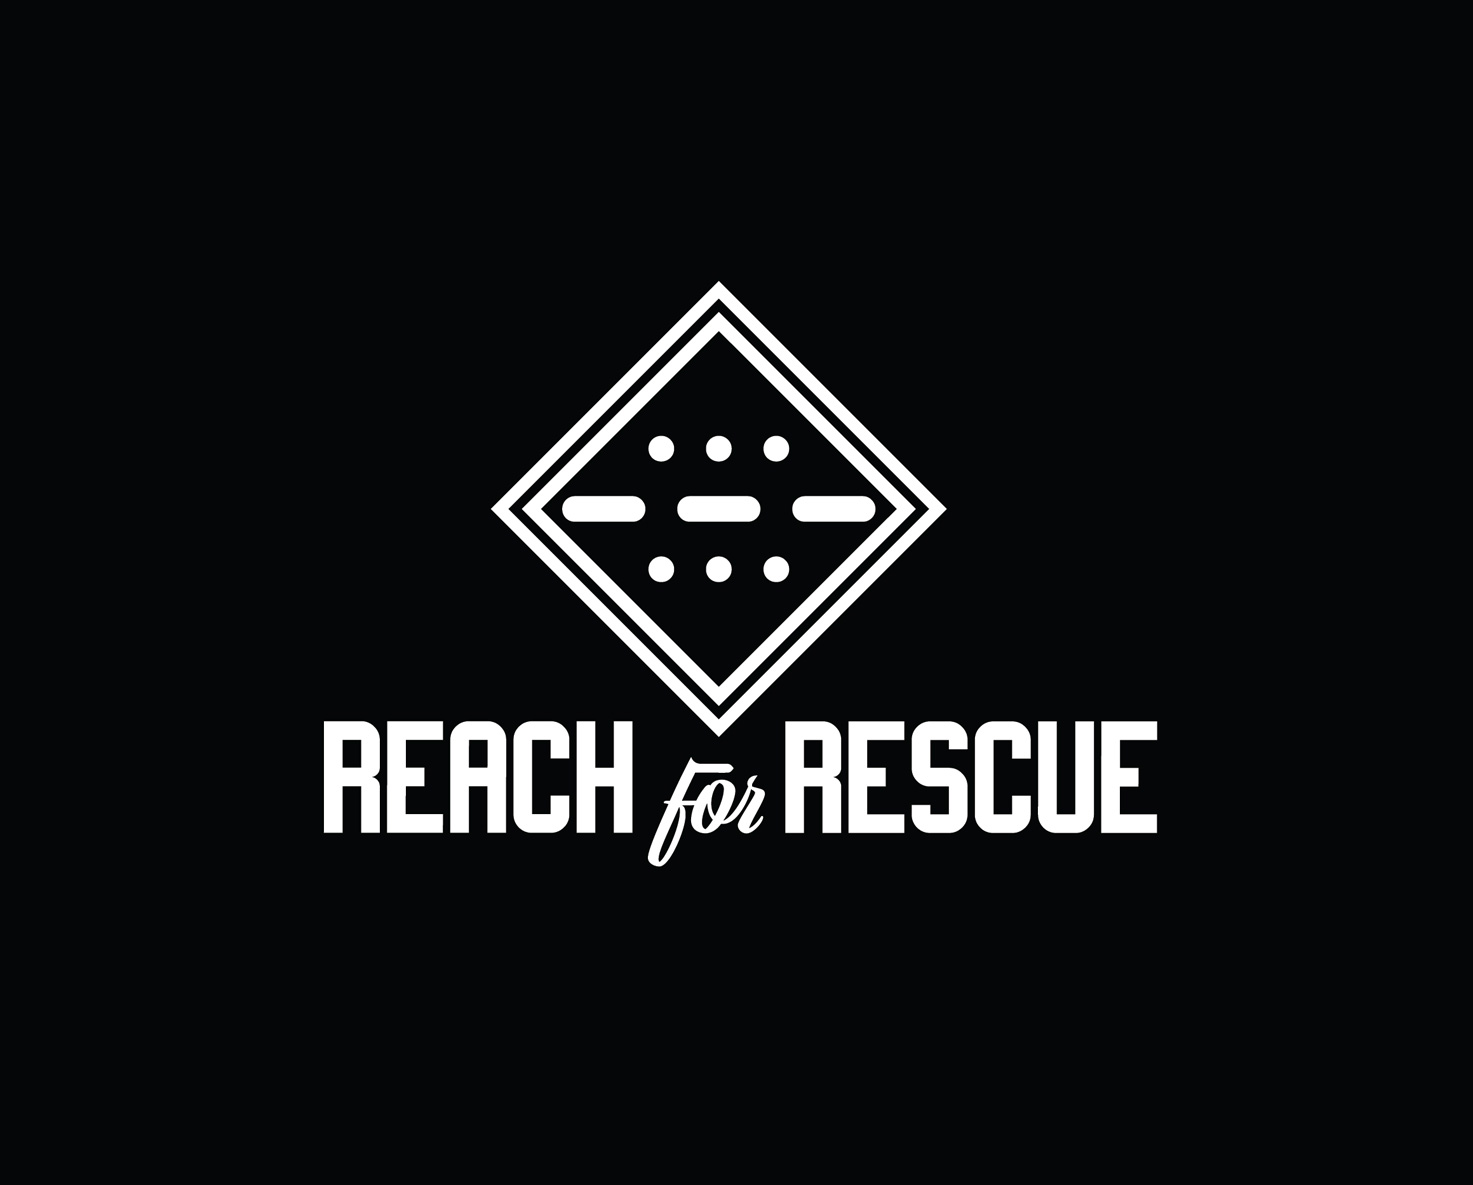 A cover photo showing the finished Reach for Rescue logo.